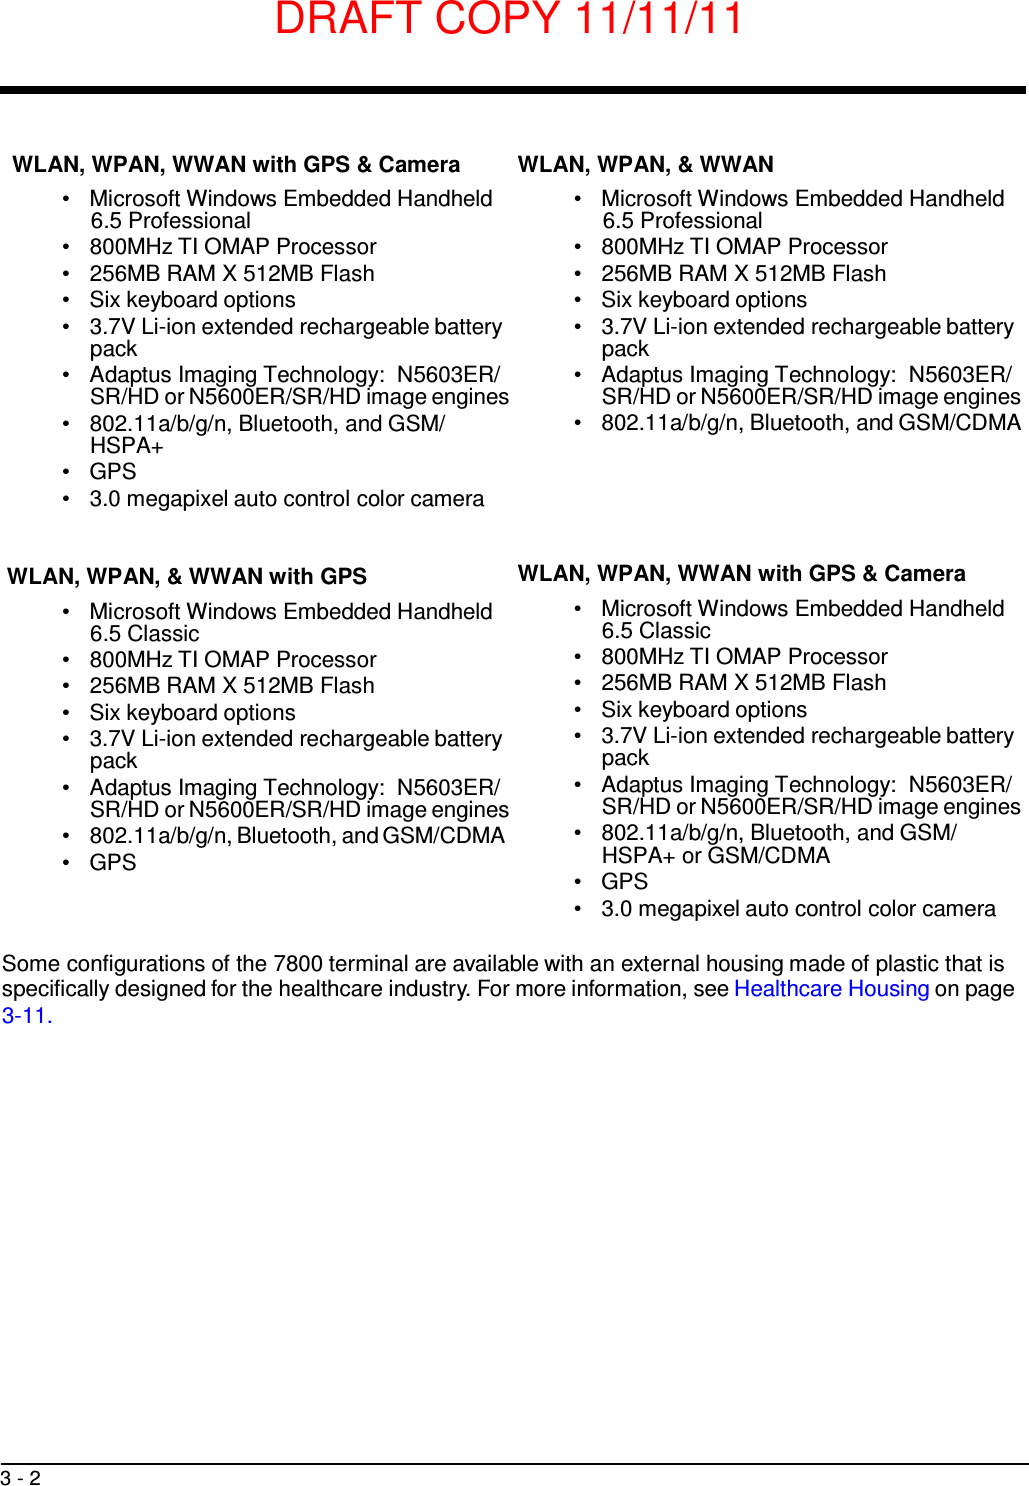 DRAFT COPY 11/11/11 3 - 2      WLAN, WPAN, WWAN with GPS &amp; Camera •   Microsoft Windows Embedded Handheld 6.5 Professional •   800MHz TI OMAP Processor •   256MB RAM X 512MB Flash •   Six keyboard options •   3.7V Li-ion extended rechargeable battery pack •   Adaptus Imaging Technology:  N5603ER/ SR/HD or N5600ER/SR/HD image engines •   802.11a/b/g/n, Bluetooth, and GSM/ HSPA+ •   GPS •   3.0 megapixel auto control color camera WLAN, WPAN, &amp; WWAN •   Microsoft Windows Embedded Handheld 6.5 Professional •   800MHz TI OMAP Processor •   256MB RAM X 512MB Flash •   Six keyboard options •   3.7V Li-ion extended rechargeable battery pack •   Adaptus Imaging Technology:  N5603ER/ SR/HD or N5600ER/SR/HD image engines •   802.11a/b/g/n, Bluetooth, and GSM/CDMA    WLAN, WPAN, &amp; WWAN with GPS •   Microsoft Windows Embedded Handheld 6.5 Classic •   800MHz TI OMAP Processor •   256MB RAM X 512MB Flash •   Six keyboard options •   3.7V Li-ion extended rechargeable battery pack •   Adaptus Imaging Technology:  N5603ER/ SR/HD or N5600ER/SR/HD image engines •   802.11a/b/g/n, Bluetooth, and GSM/CDMA •   GPS WLAN, WPAN, WWAN with GPS &amp; Camera •   Microsoft Windows Embedded Handheld 6.5 Classic •   800MHz TI OMAP Processor •   256MB RAM X 512MB Flash •   Six keyboard options •   3.7V Li-ion extended rechargeable battery pack •   Adaptus Imaging Technology:  N5603ER/ SR/HD or N5600ER/SR/HD image engines •   802.11a/b/g/n, Bluetooth, and GSM/ HSPA+ or GSM/CDMA •   GPS •   3.0 megapixel auto control color camera   Some configurations of the 7800 terminal are available with an external housing made of plastic that is specifically designed for the healthcare industry. For more information, see Healthcare Housing on page 3-11. 